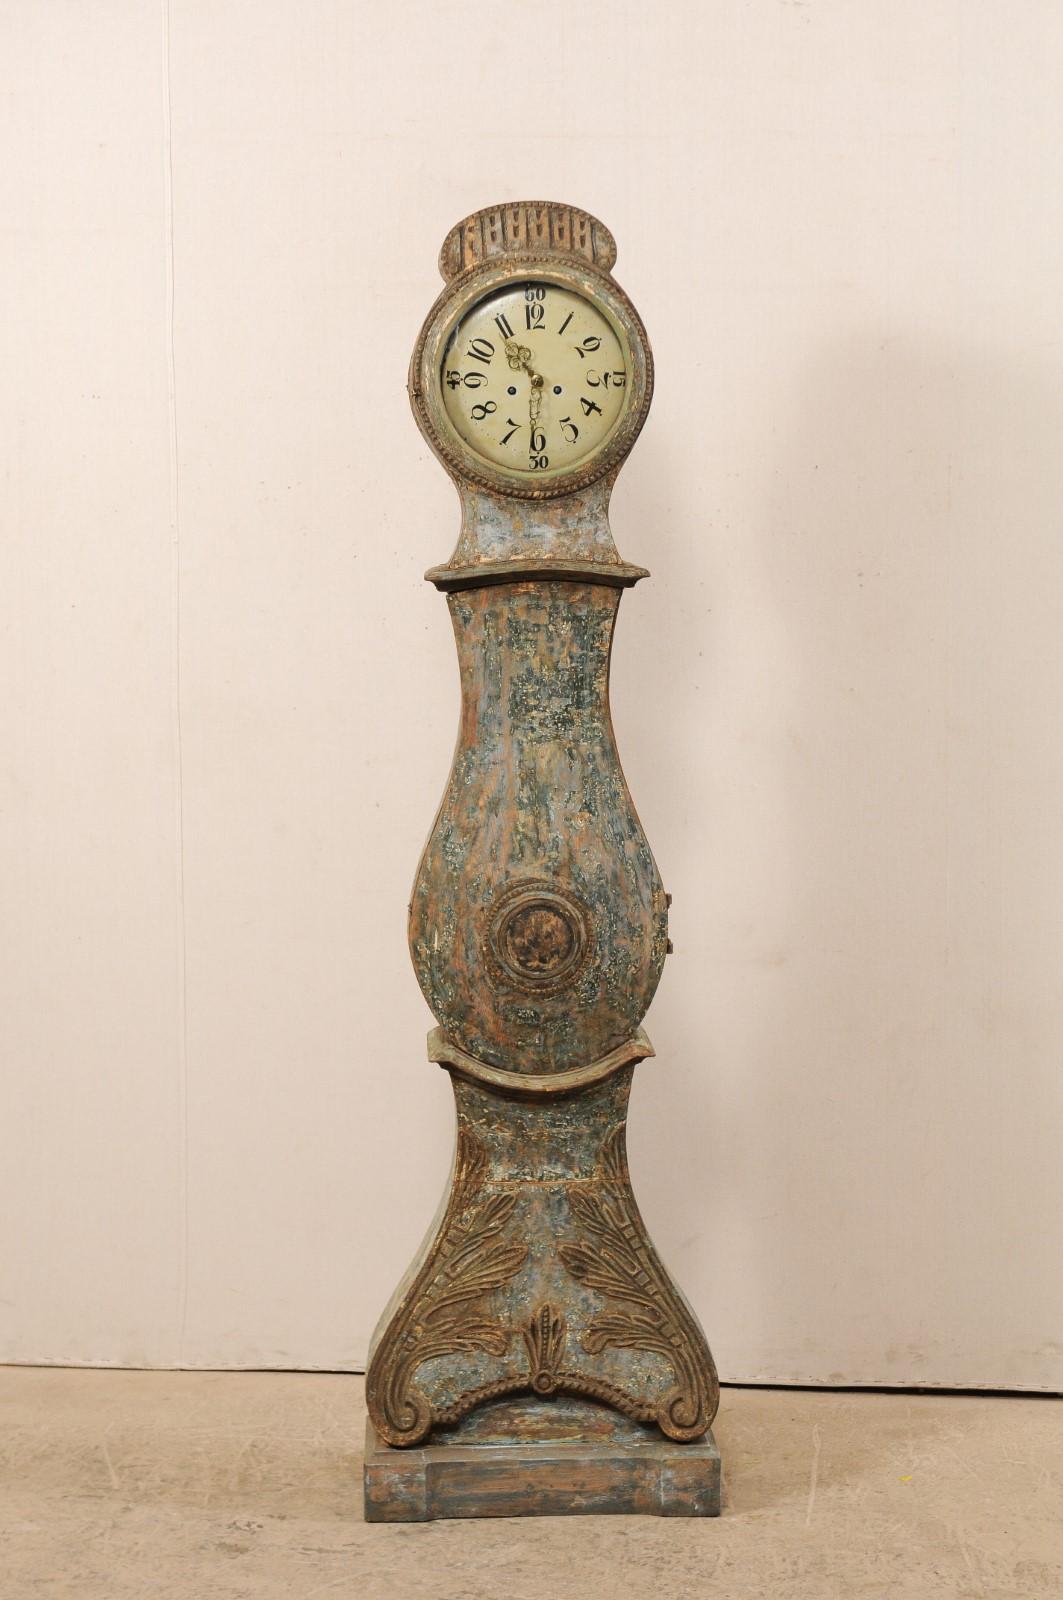 A 19th century painted wood Swedish long-case clock with distinct curvy rain-drop shaped belly. This antique floor clock from Sweden has an elongated arch crest atop it's head, with carvings and trimmed accents about it's edges and repeated about